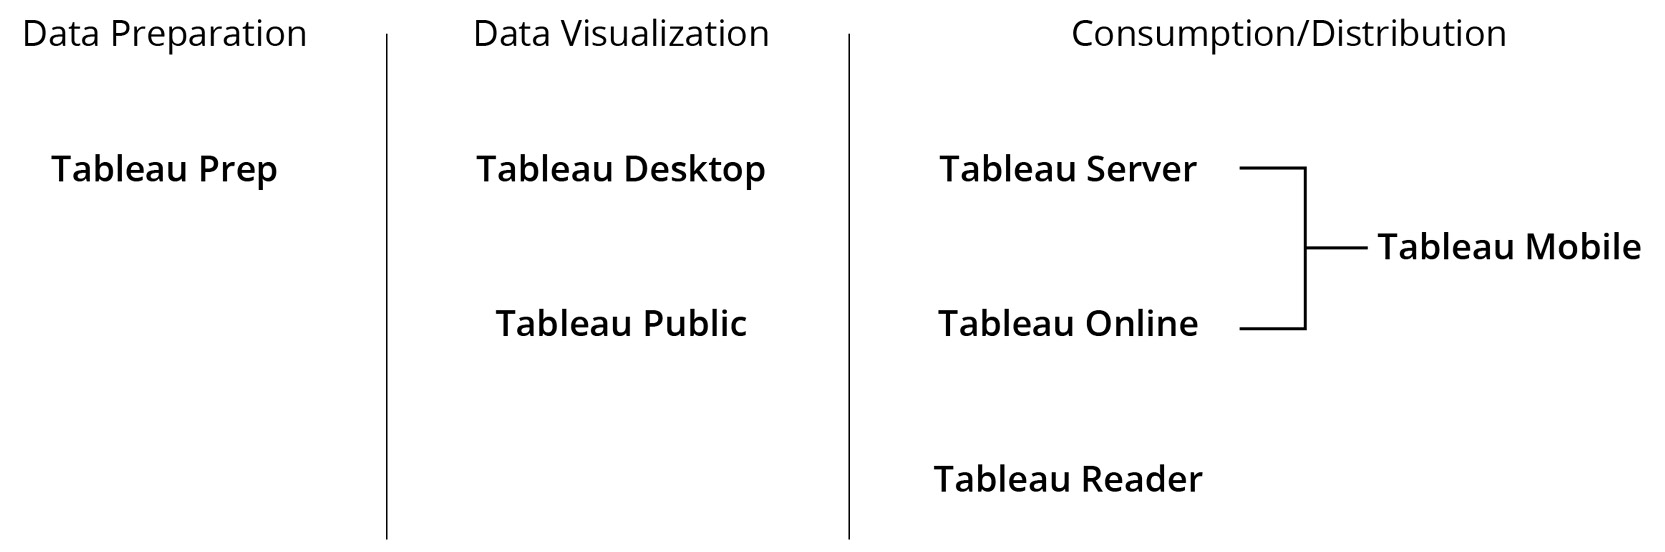 Figure 1.6: A screenshot showing the Tableau product suite
